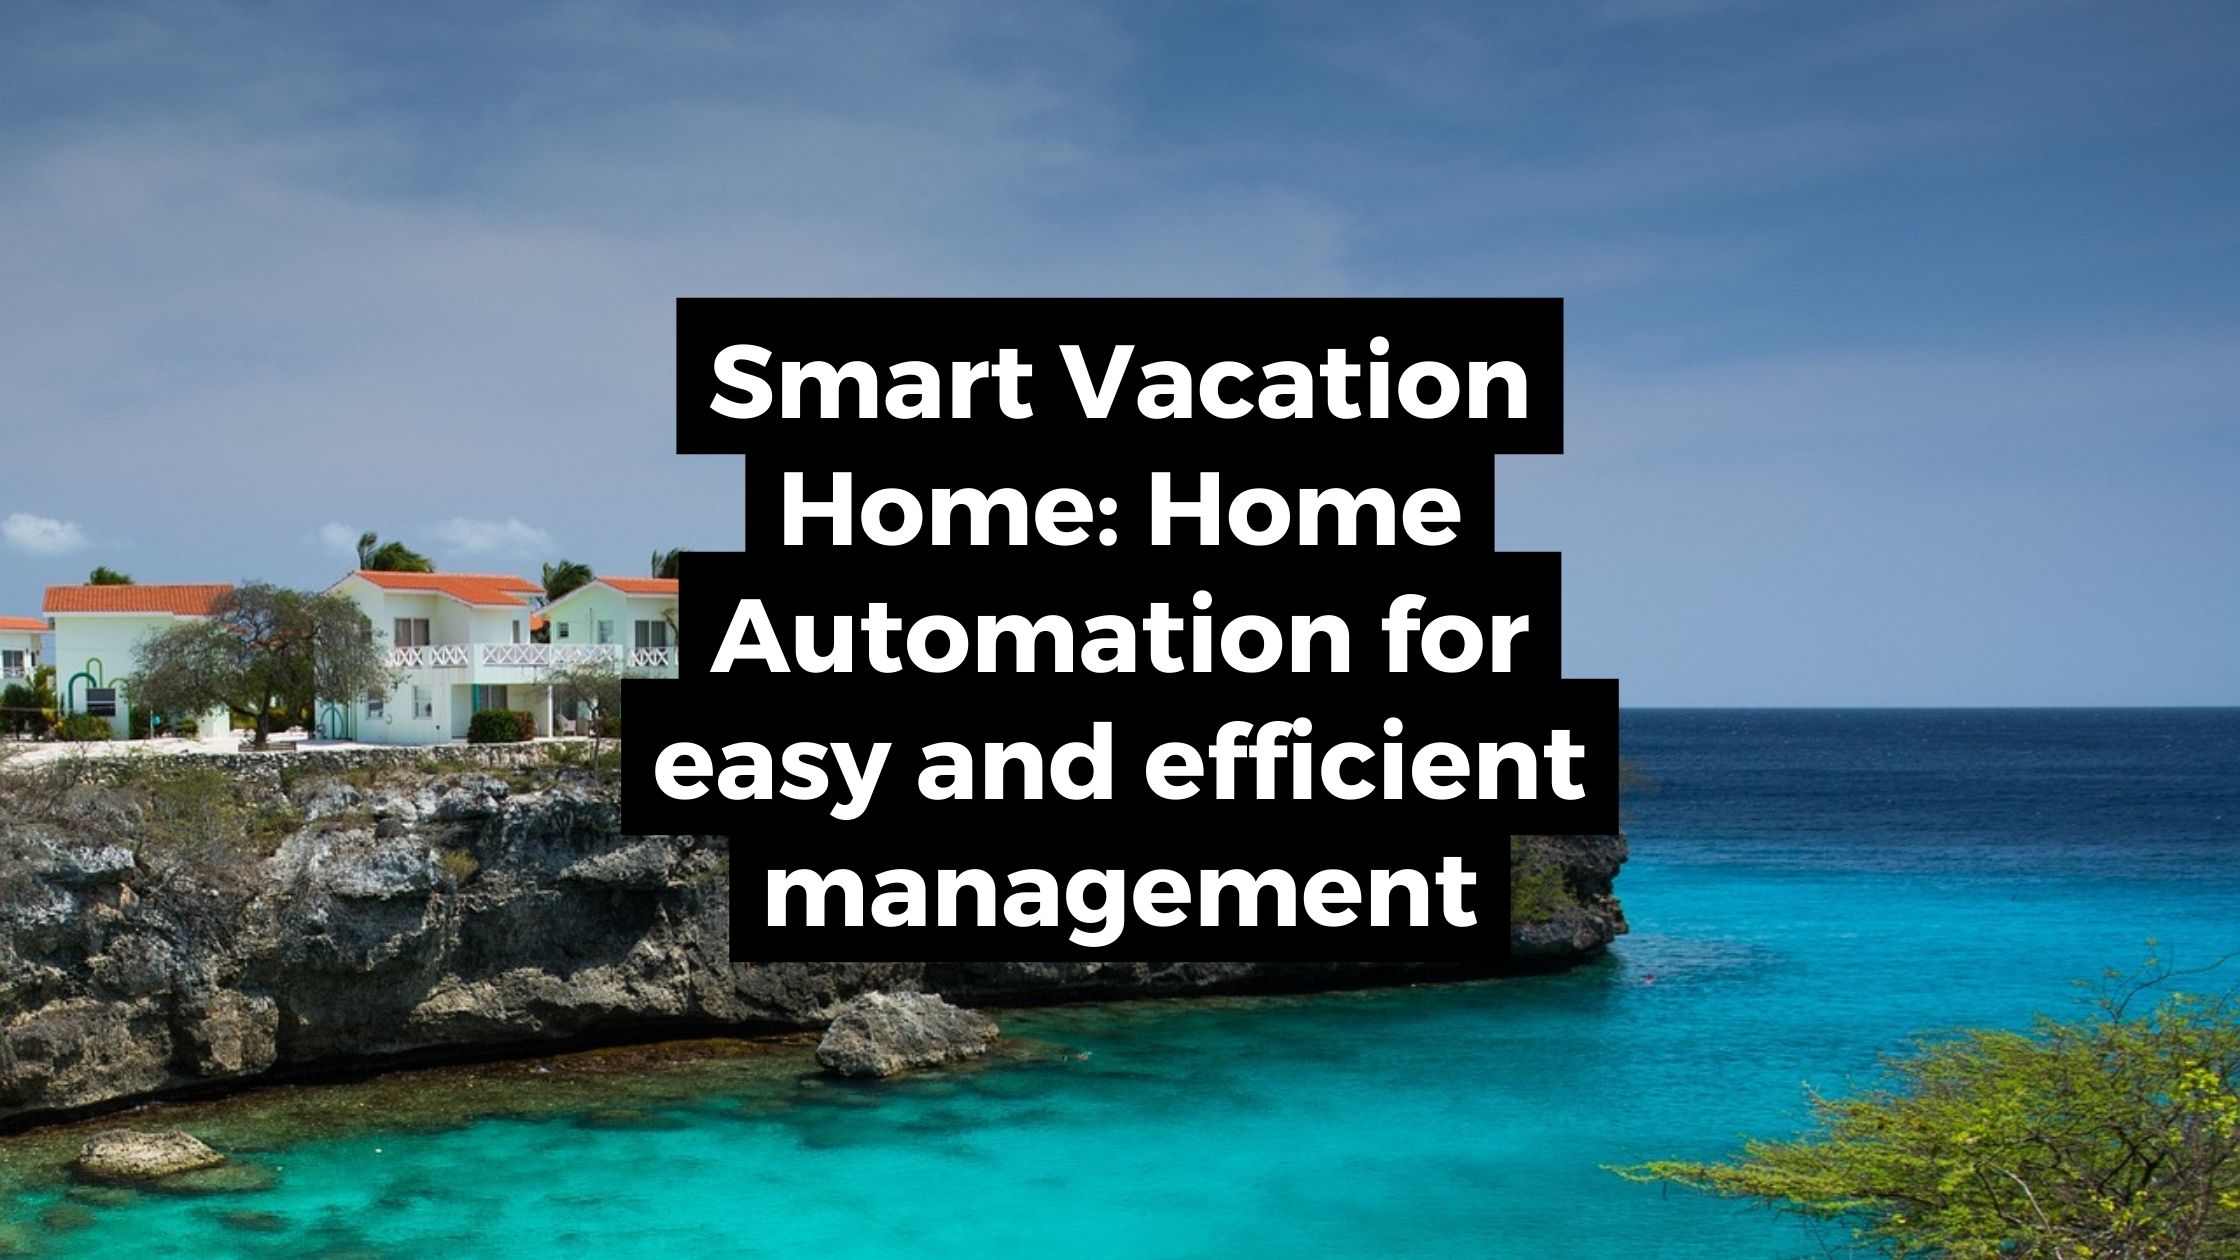 Smart vacation home